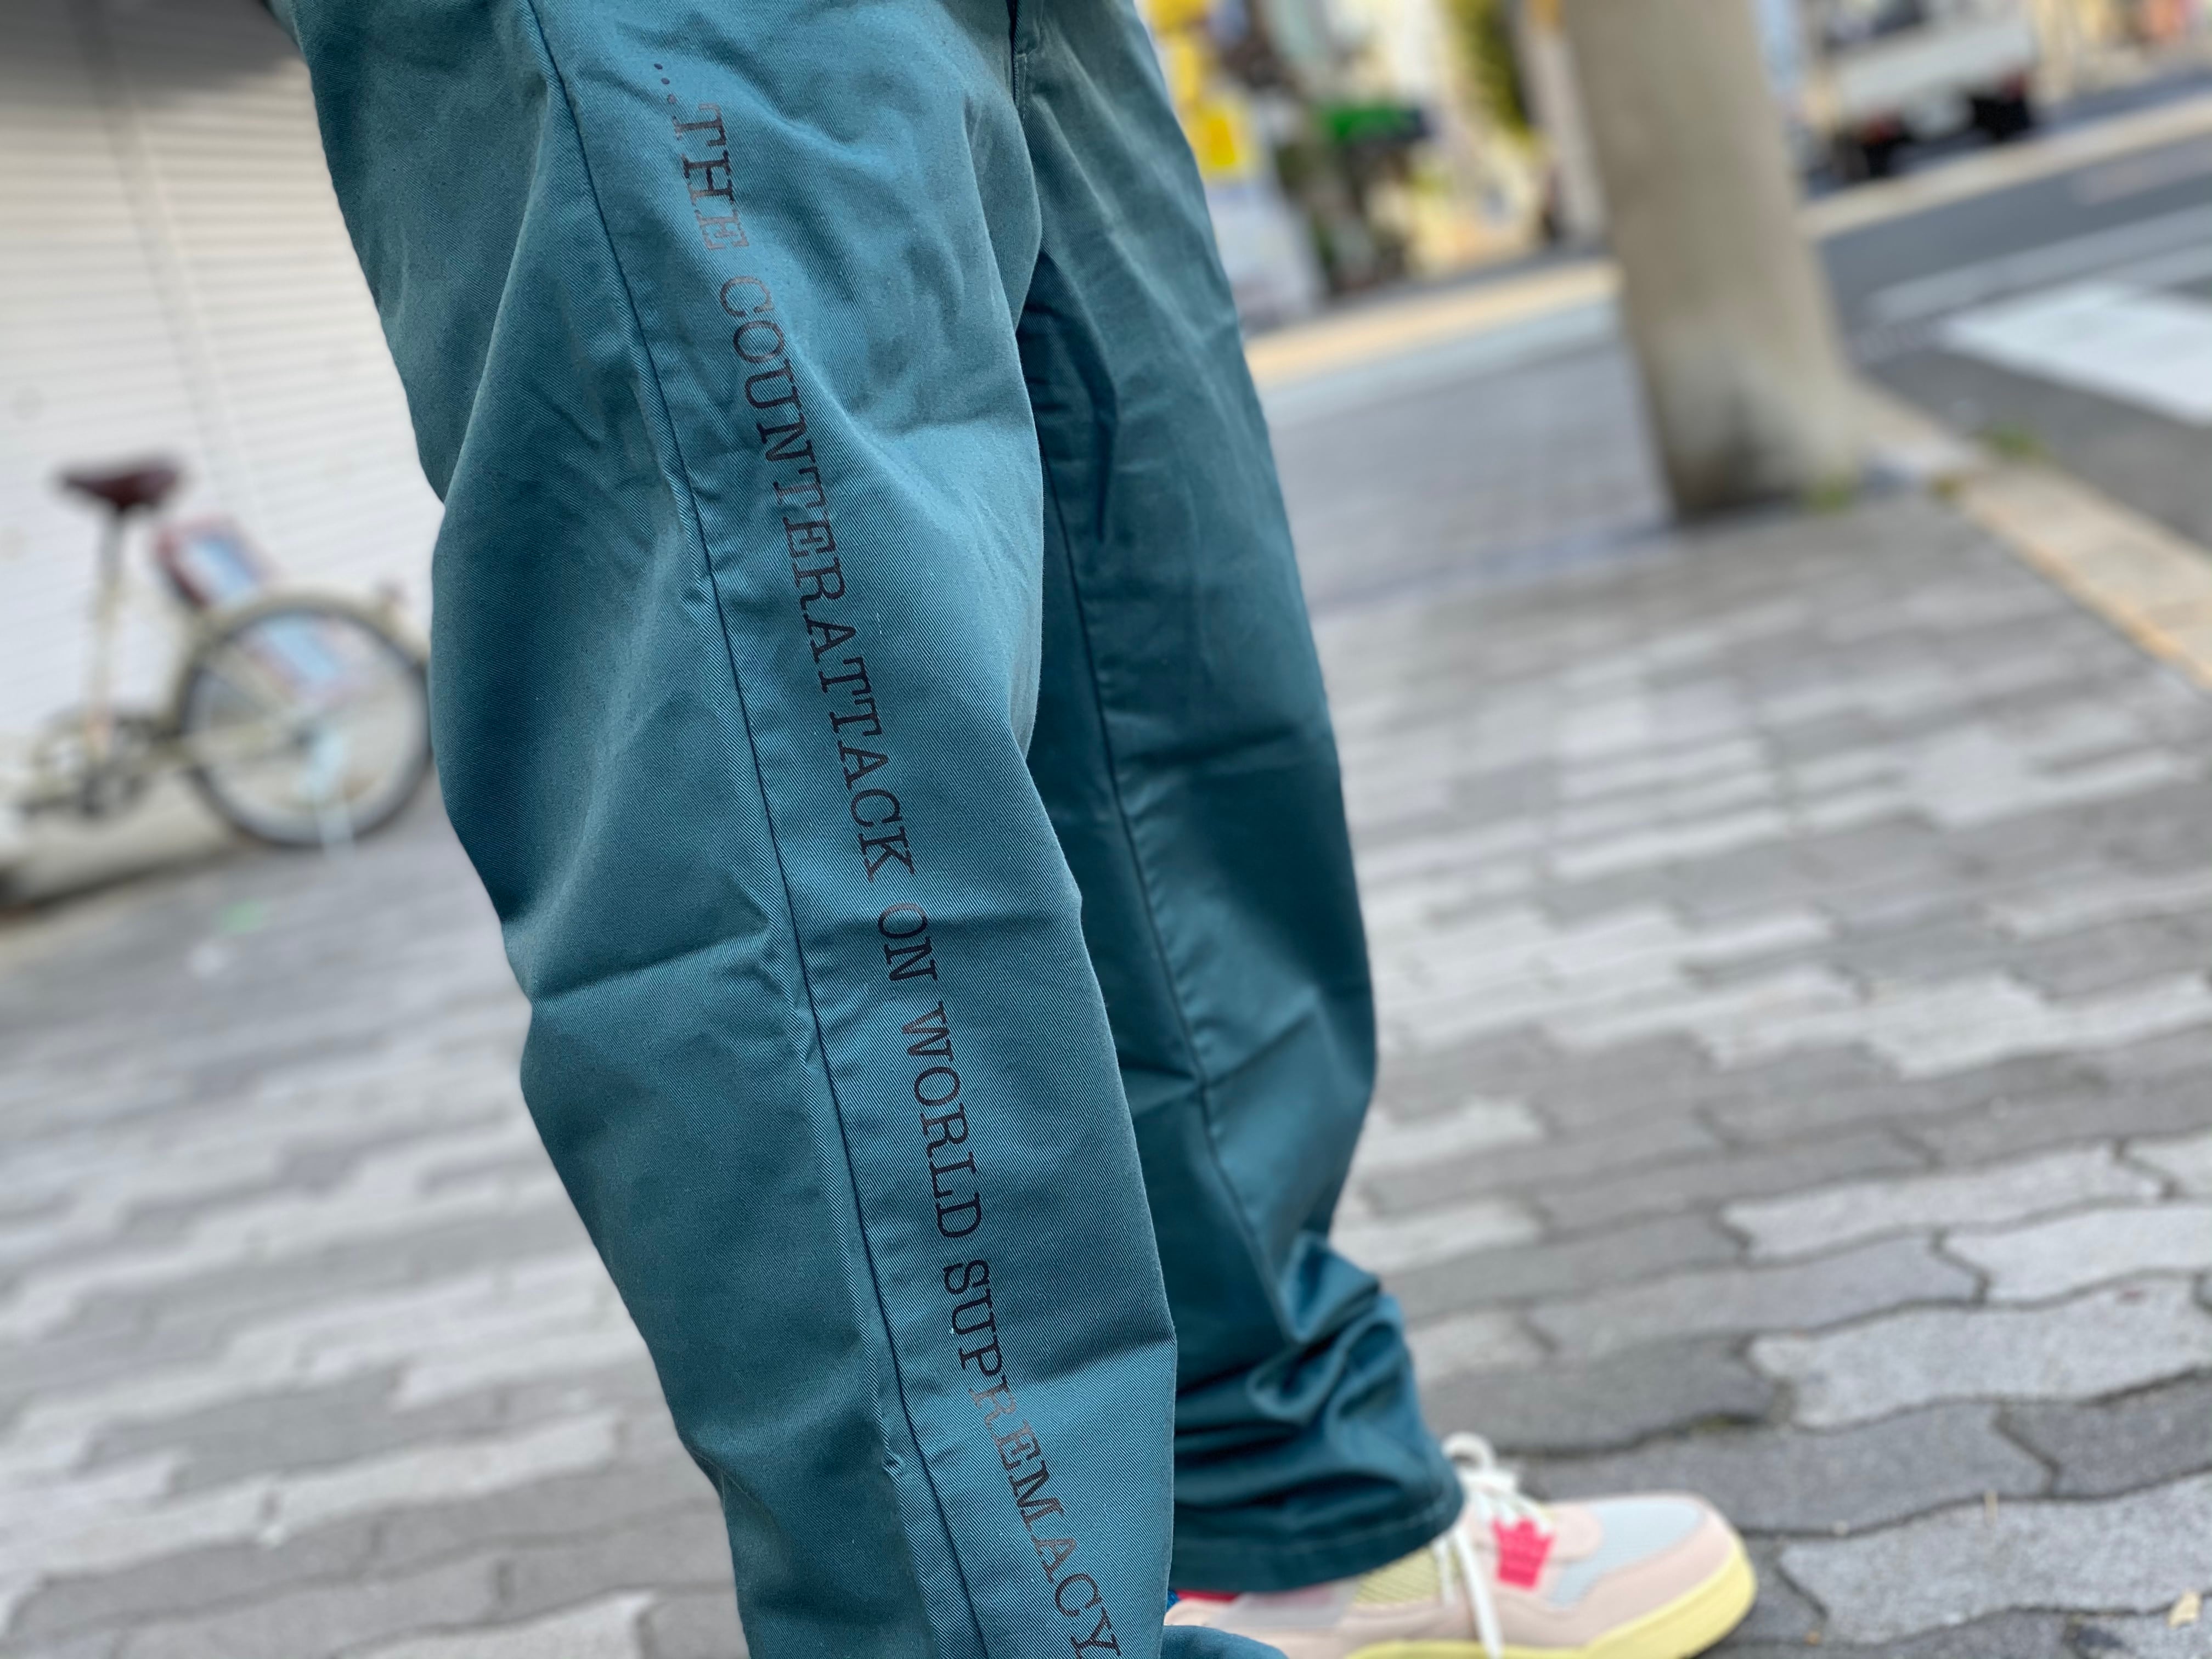 Supreme × UNDERCOVER PUBLIC ENEMY WORK PANT DUSTY TEAL 34 HJ8419 ...